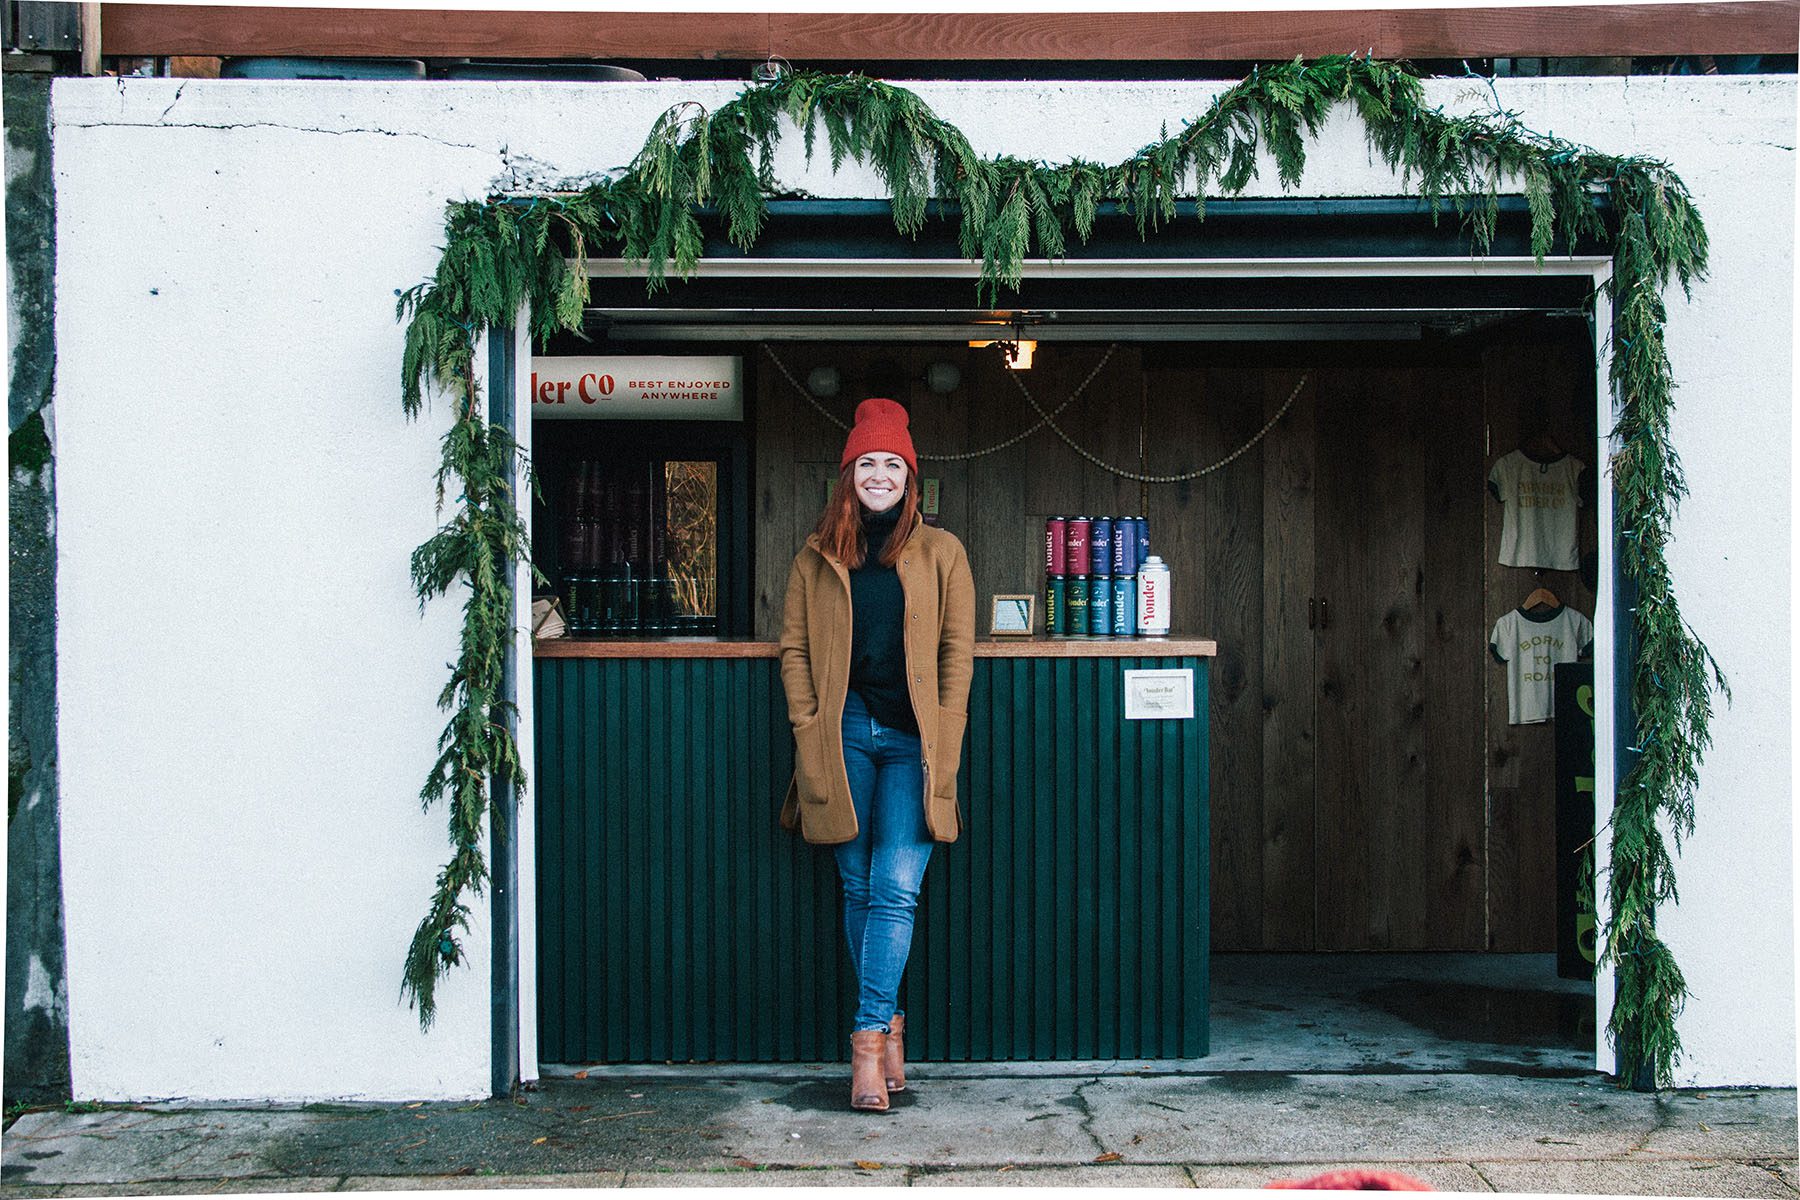 Caitlin Braam poses in front of her small business, Yonder Cider.